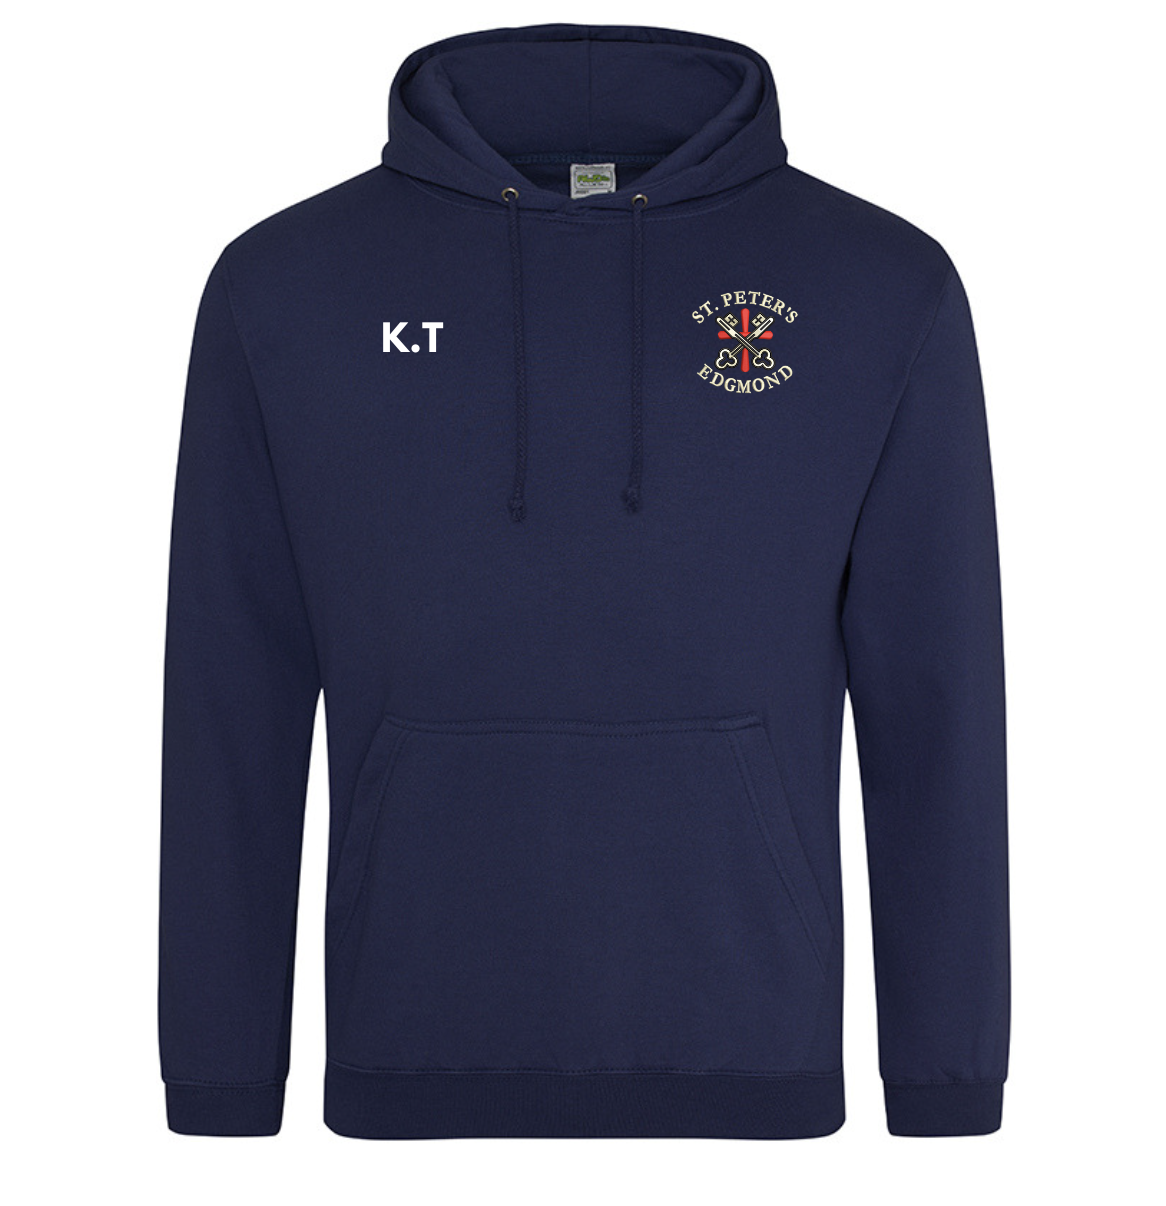 St Peter's Classic Hoodie Navy - Adults - I Want Workwear